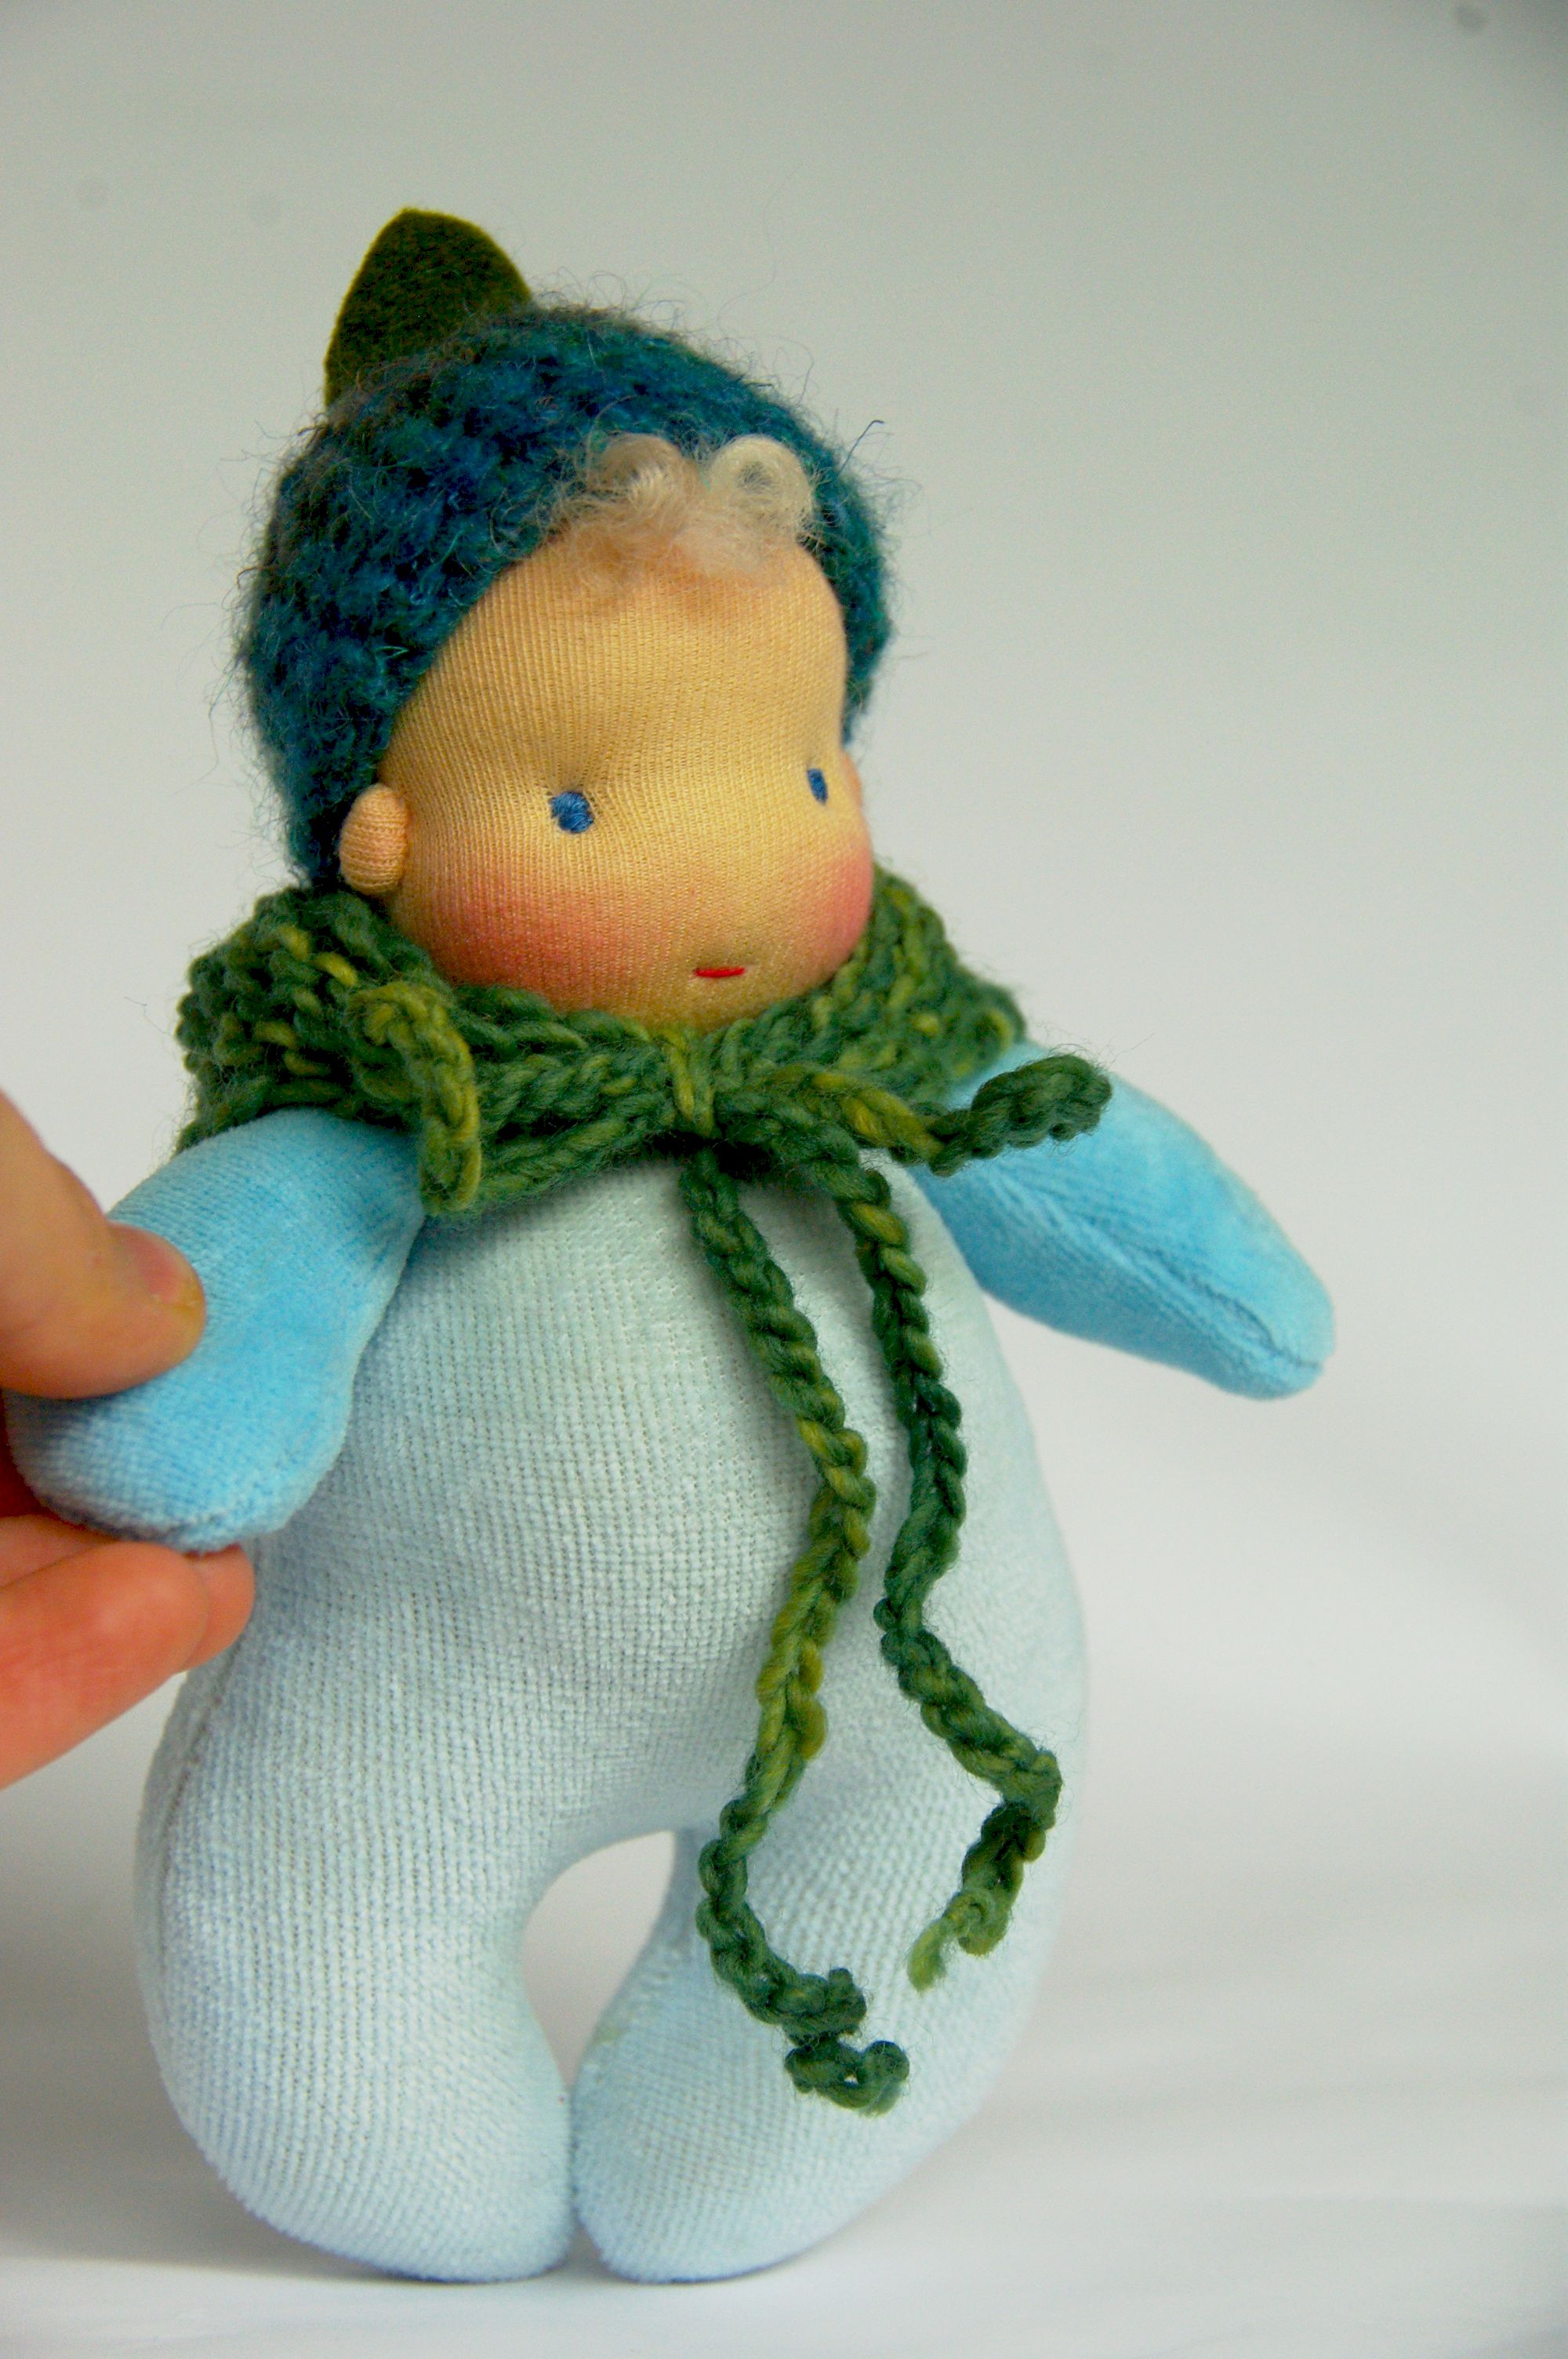 Tommy is a handmade baby doll, made by Atelier Lavendel. Handmade in Germany.